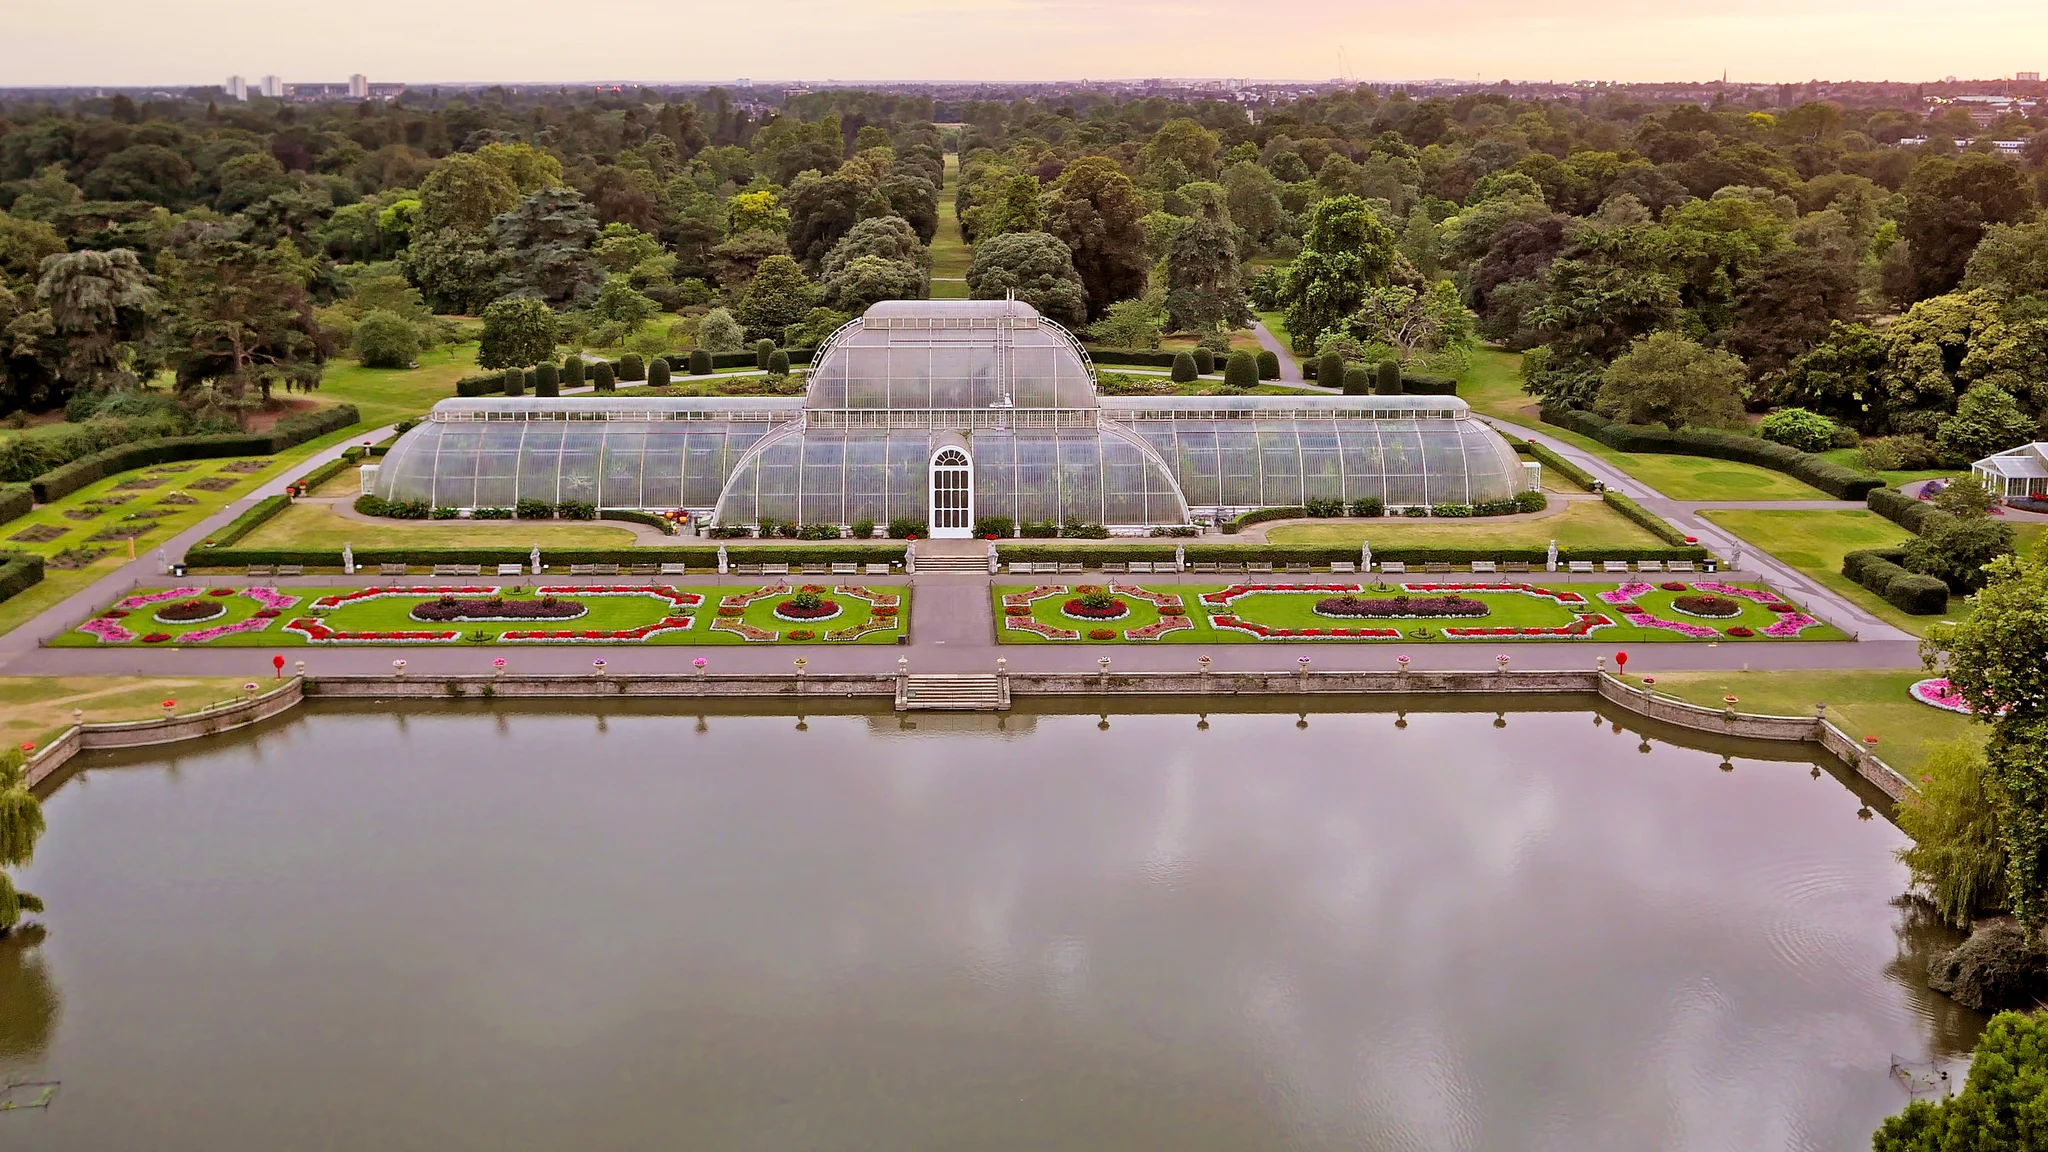 Aerial view of Palm House at Kew Gardens. Large Glass House sits within a well manicured garden, in front of large lake